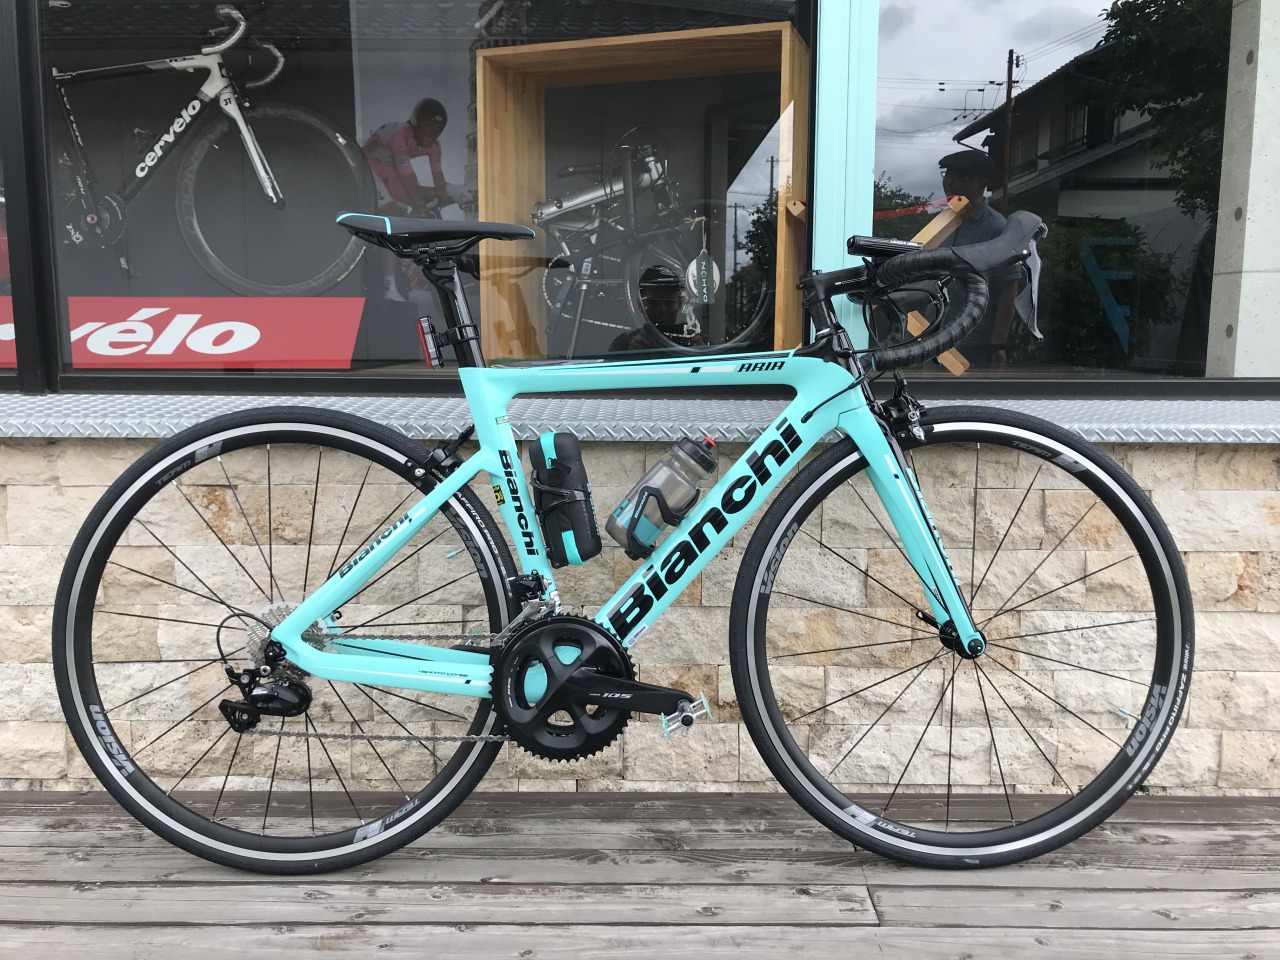 Bianchi ARIA ロードバイク納車しました！From Aさま - Climb cycle sports